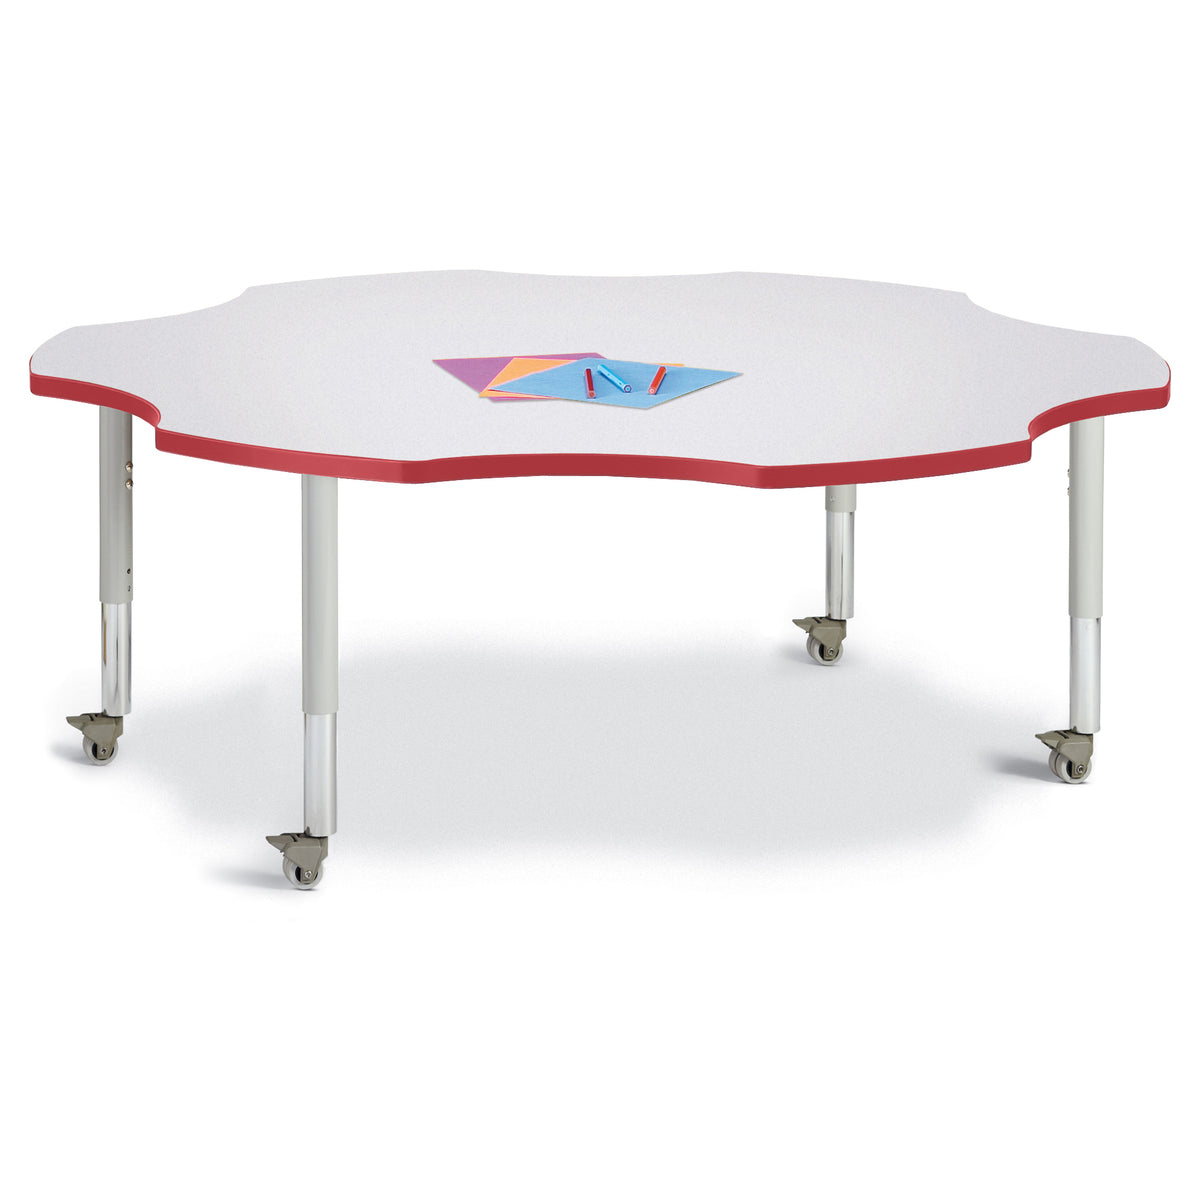 6458JCM008, Berries Six Leaf Activity Table - 60", Mobile - Freckled Gray/Red/Gray